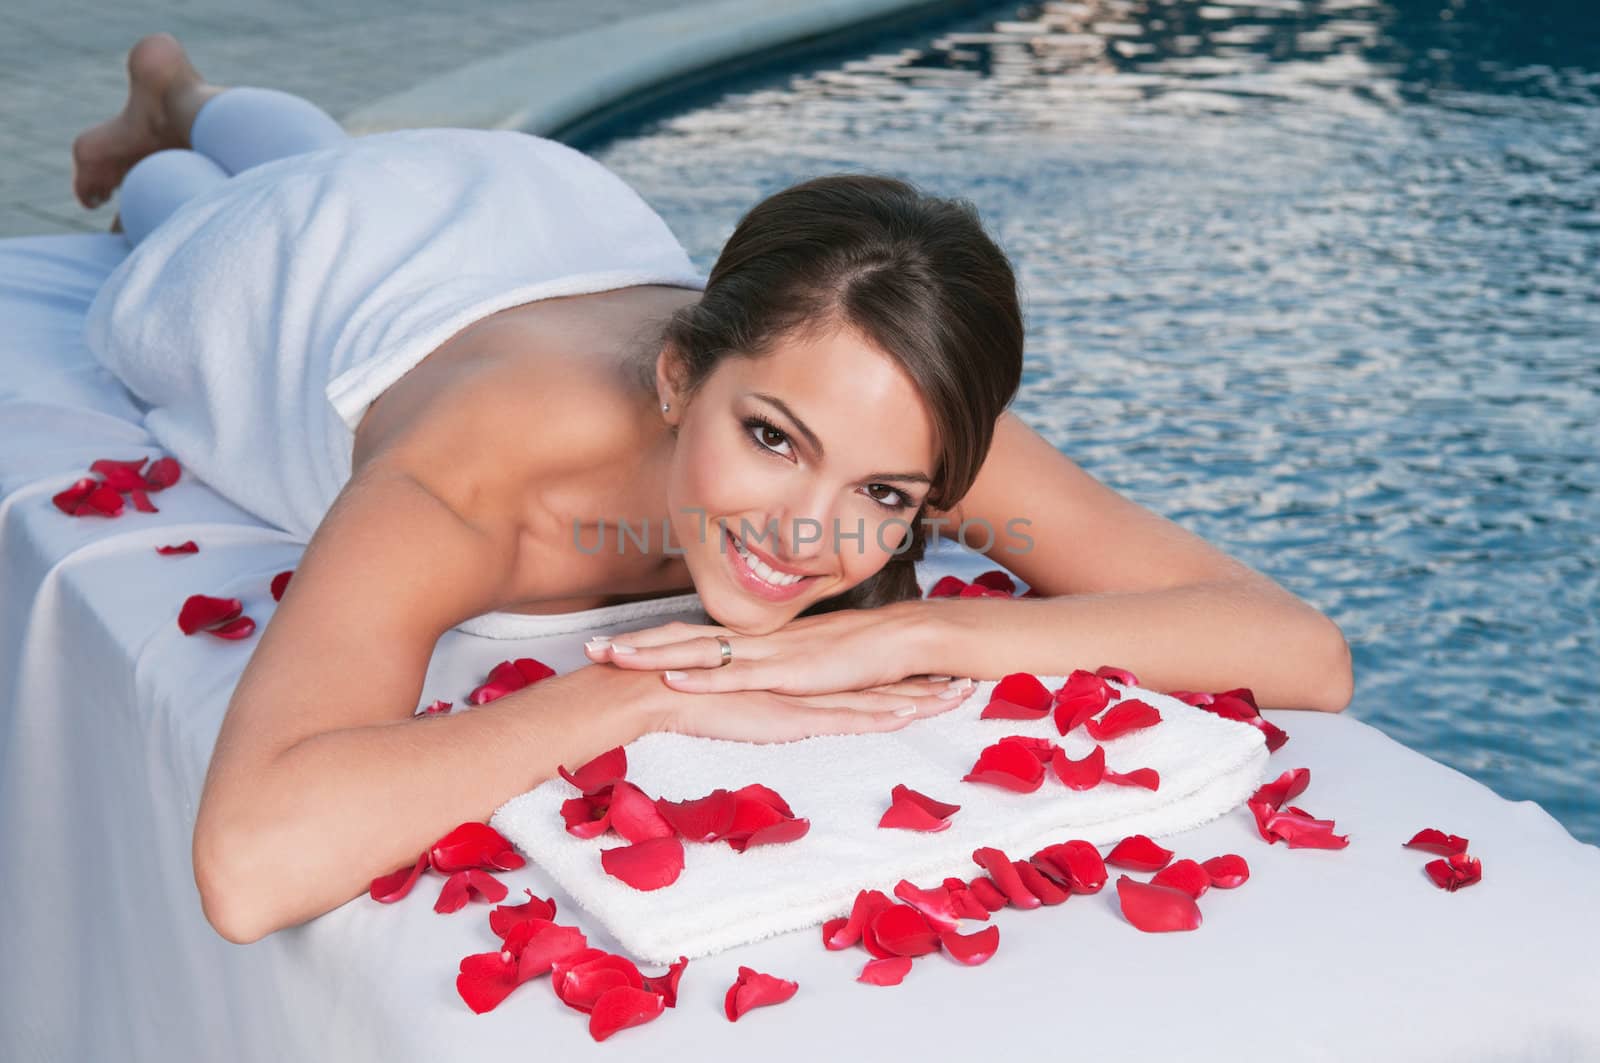 Smiling young woman at spa with pool in the background